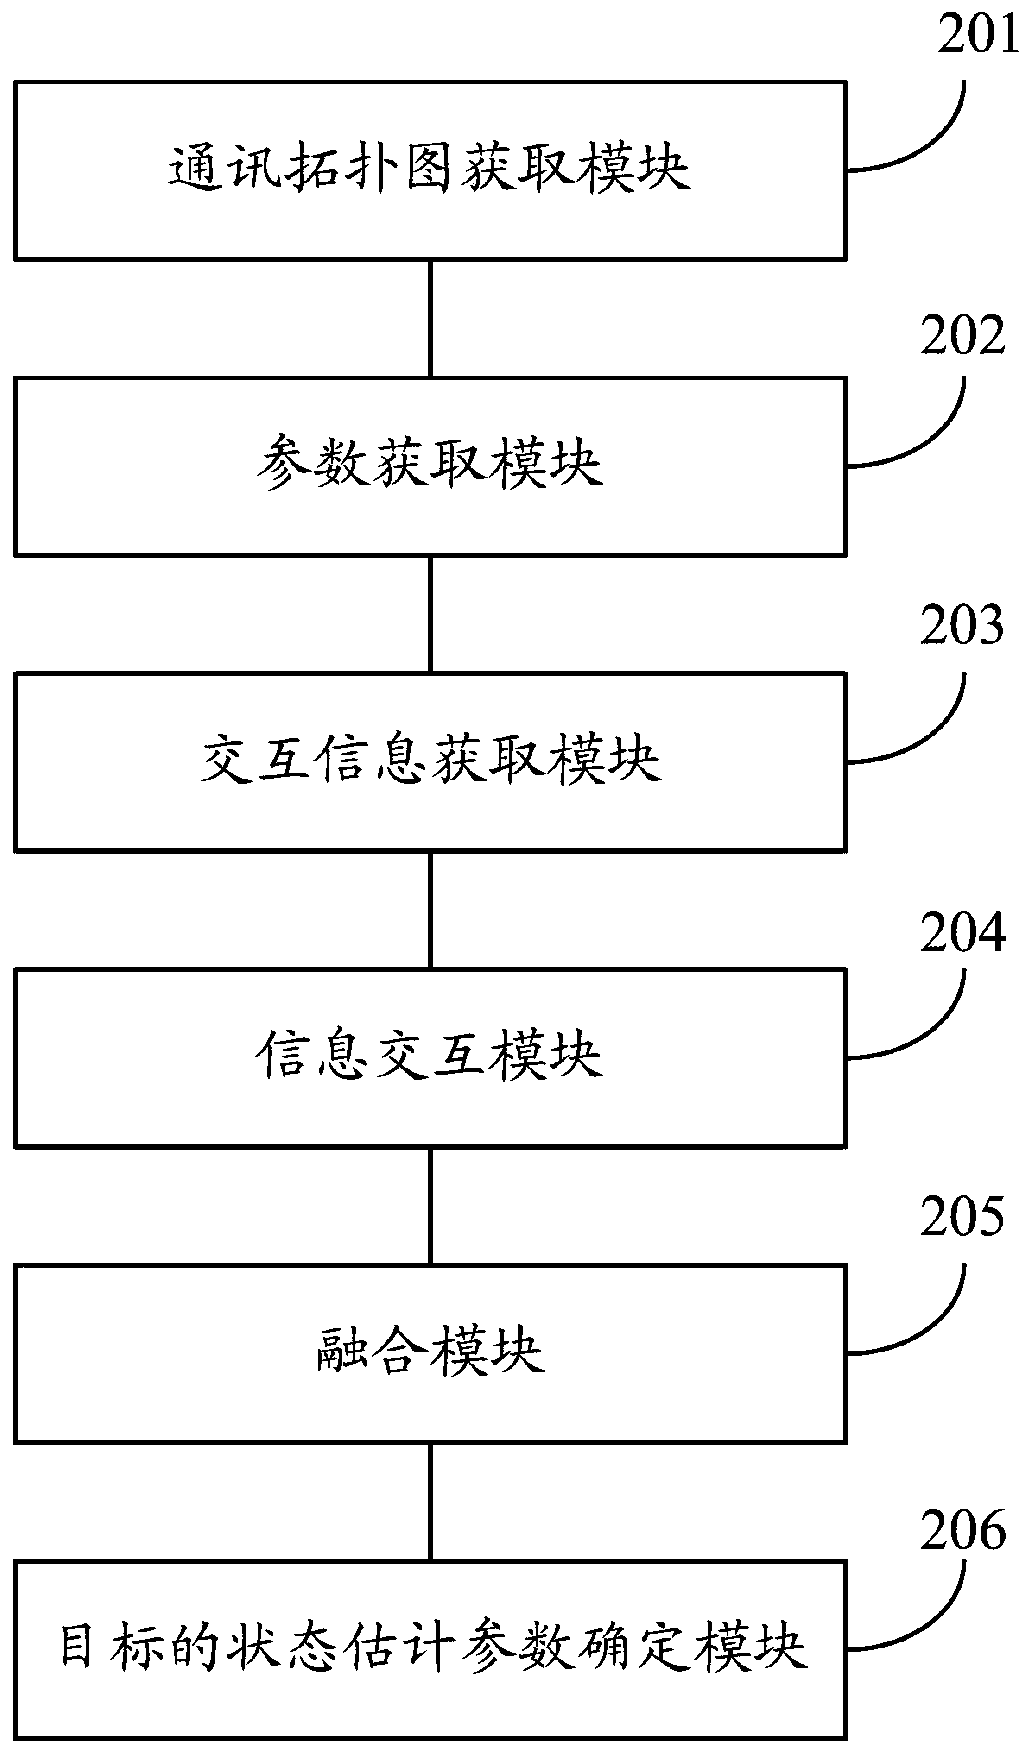 Target state estimation method and system